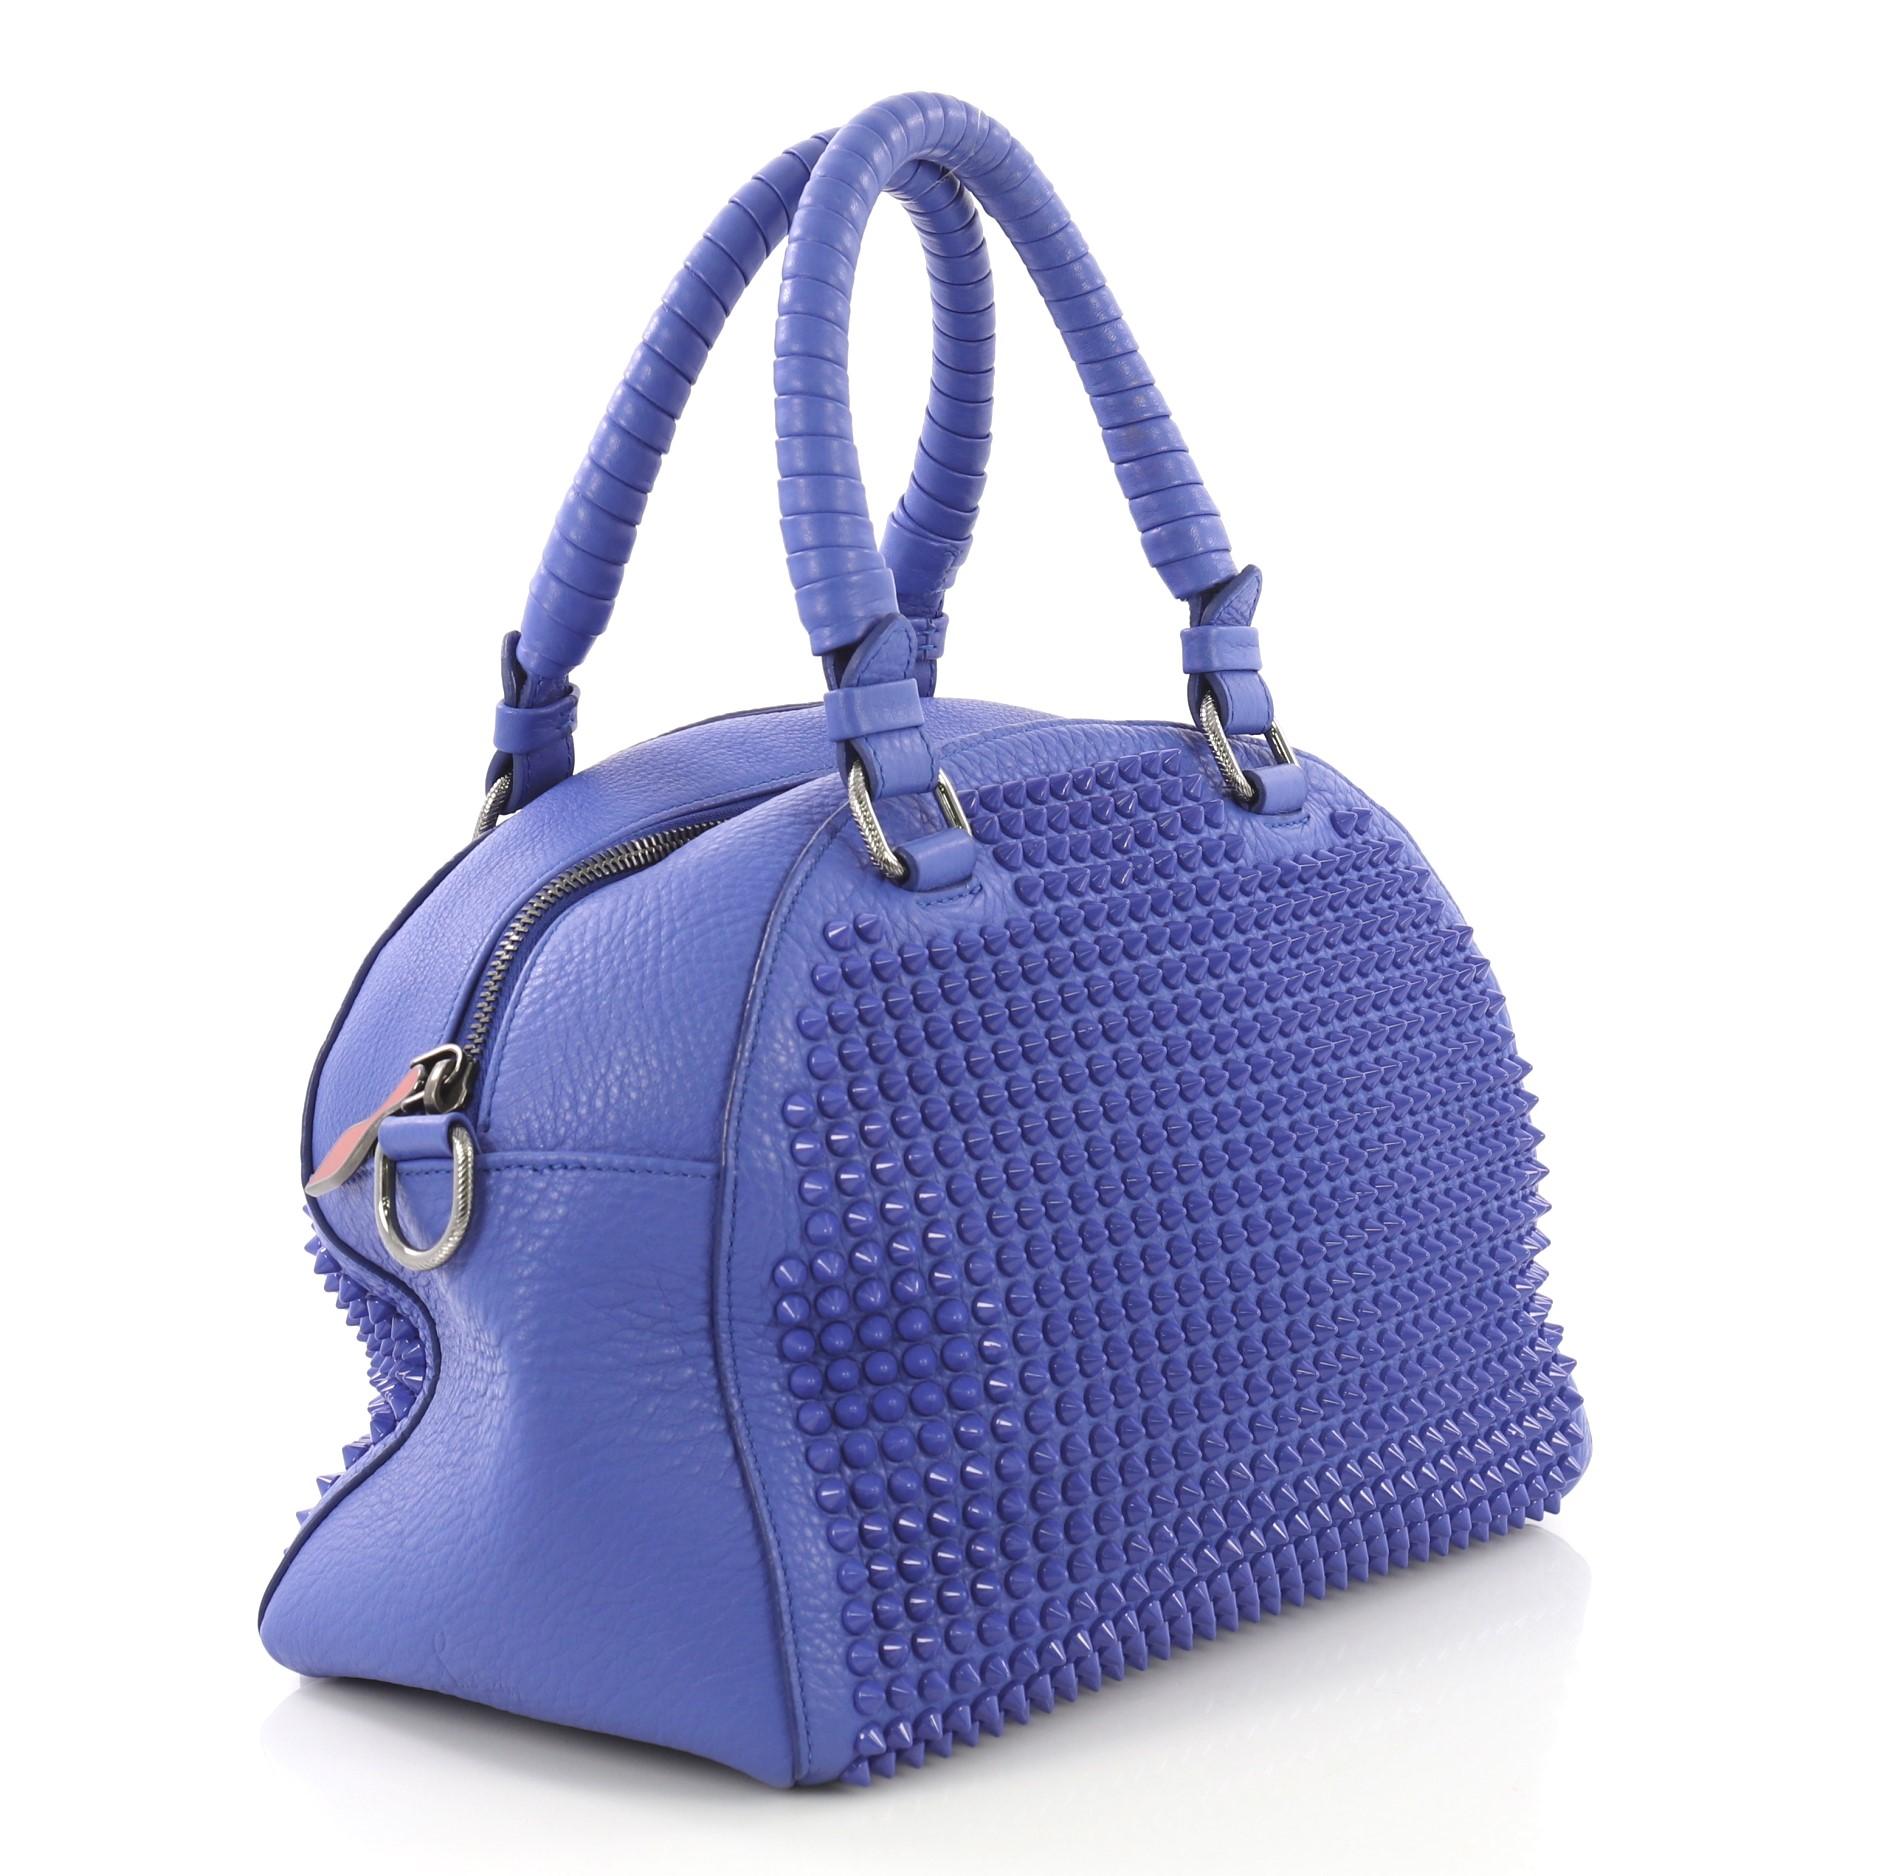 Purple Christian Louboutin Panettone Convertible Satchel Spiked Leather Small